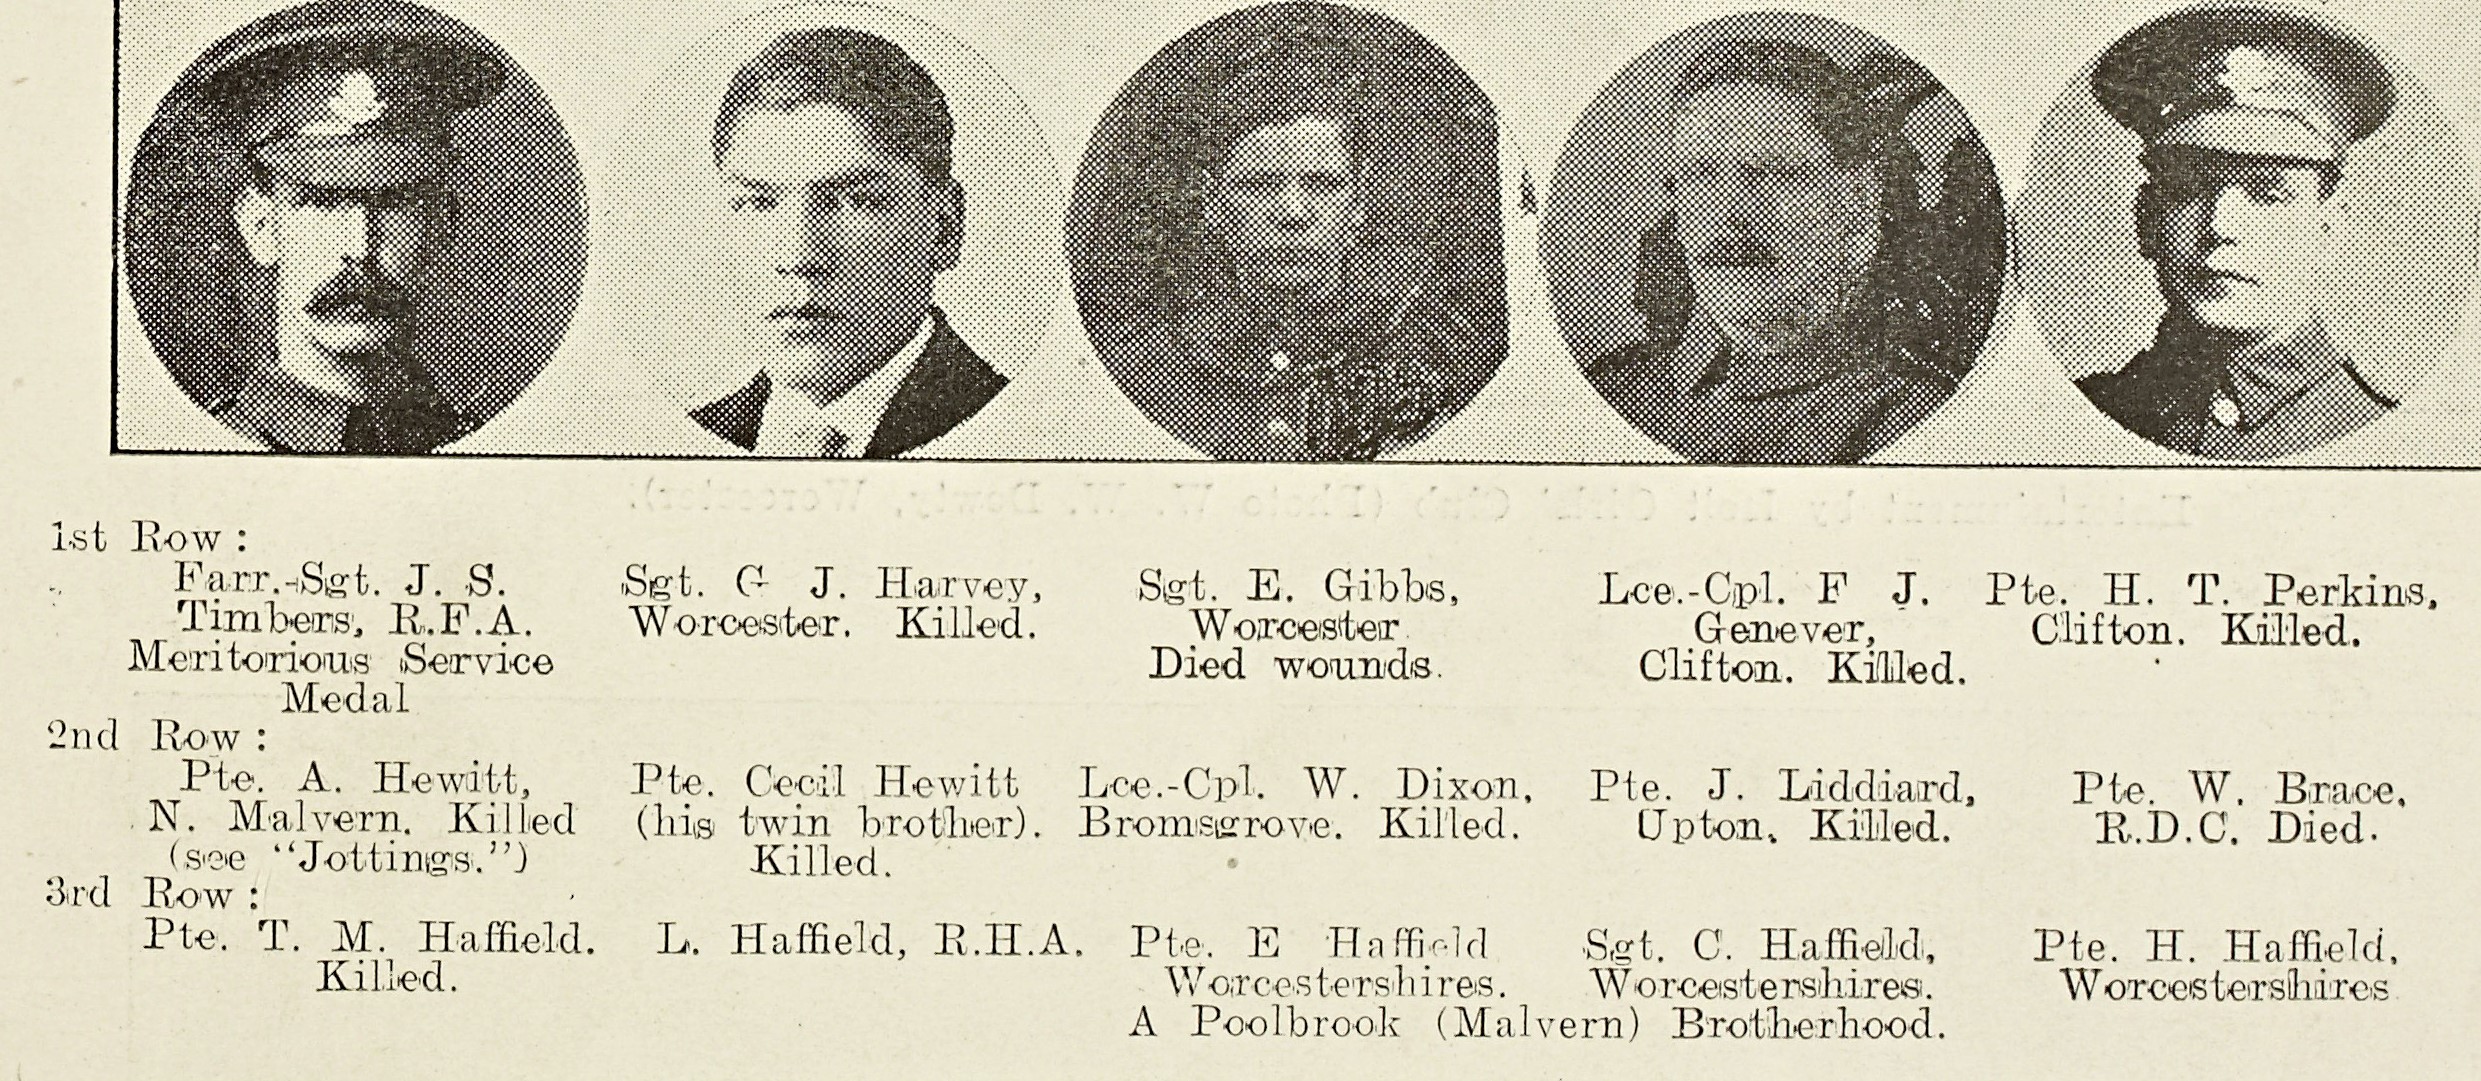 The Haffield brothers of Poolbrook